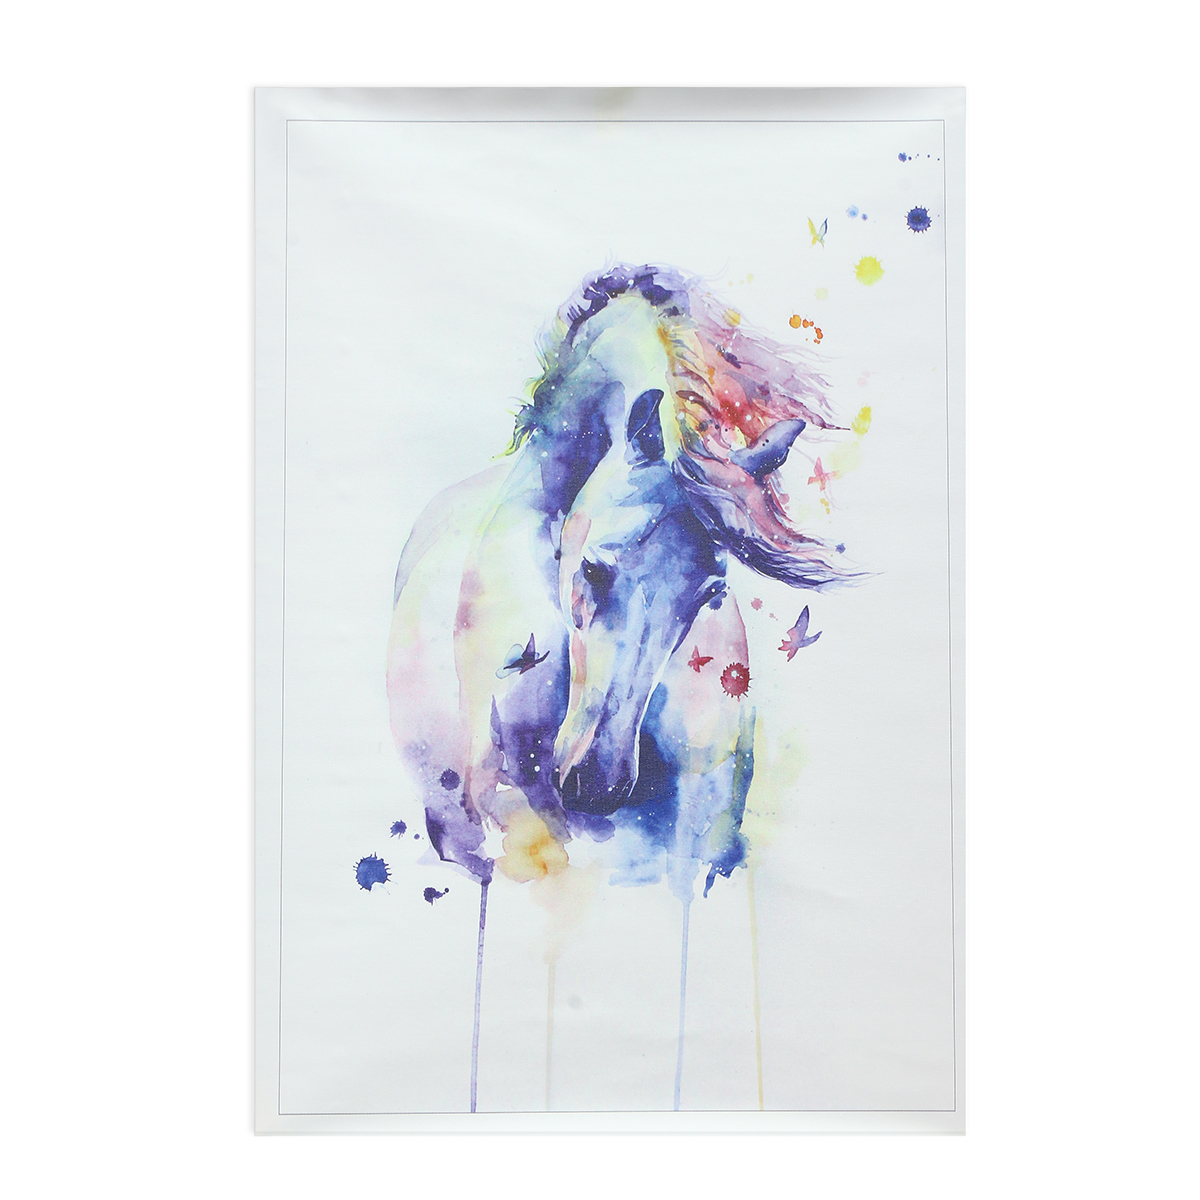 Watercolour-Fairy-Horse-Picture-Canvas-Unframed-Paintings-Abstract-Wall-Art-Decor-1370466